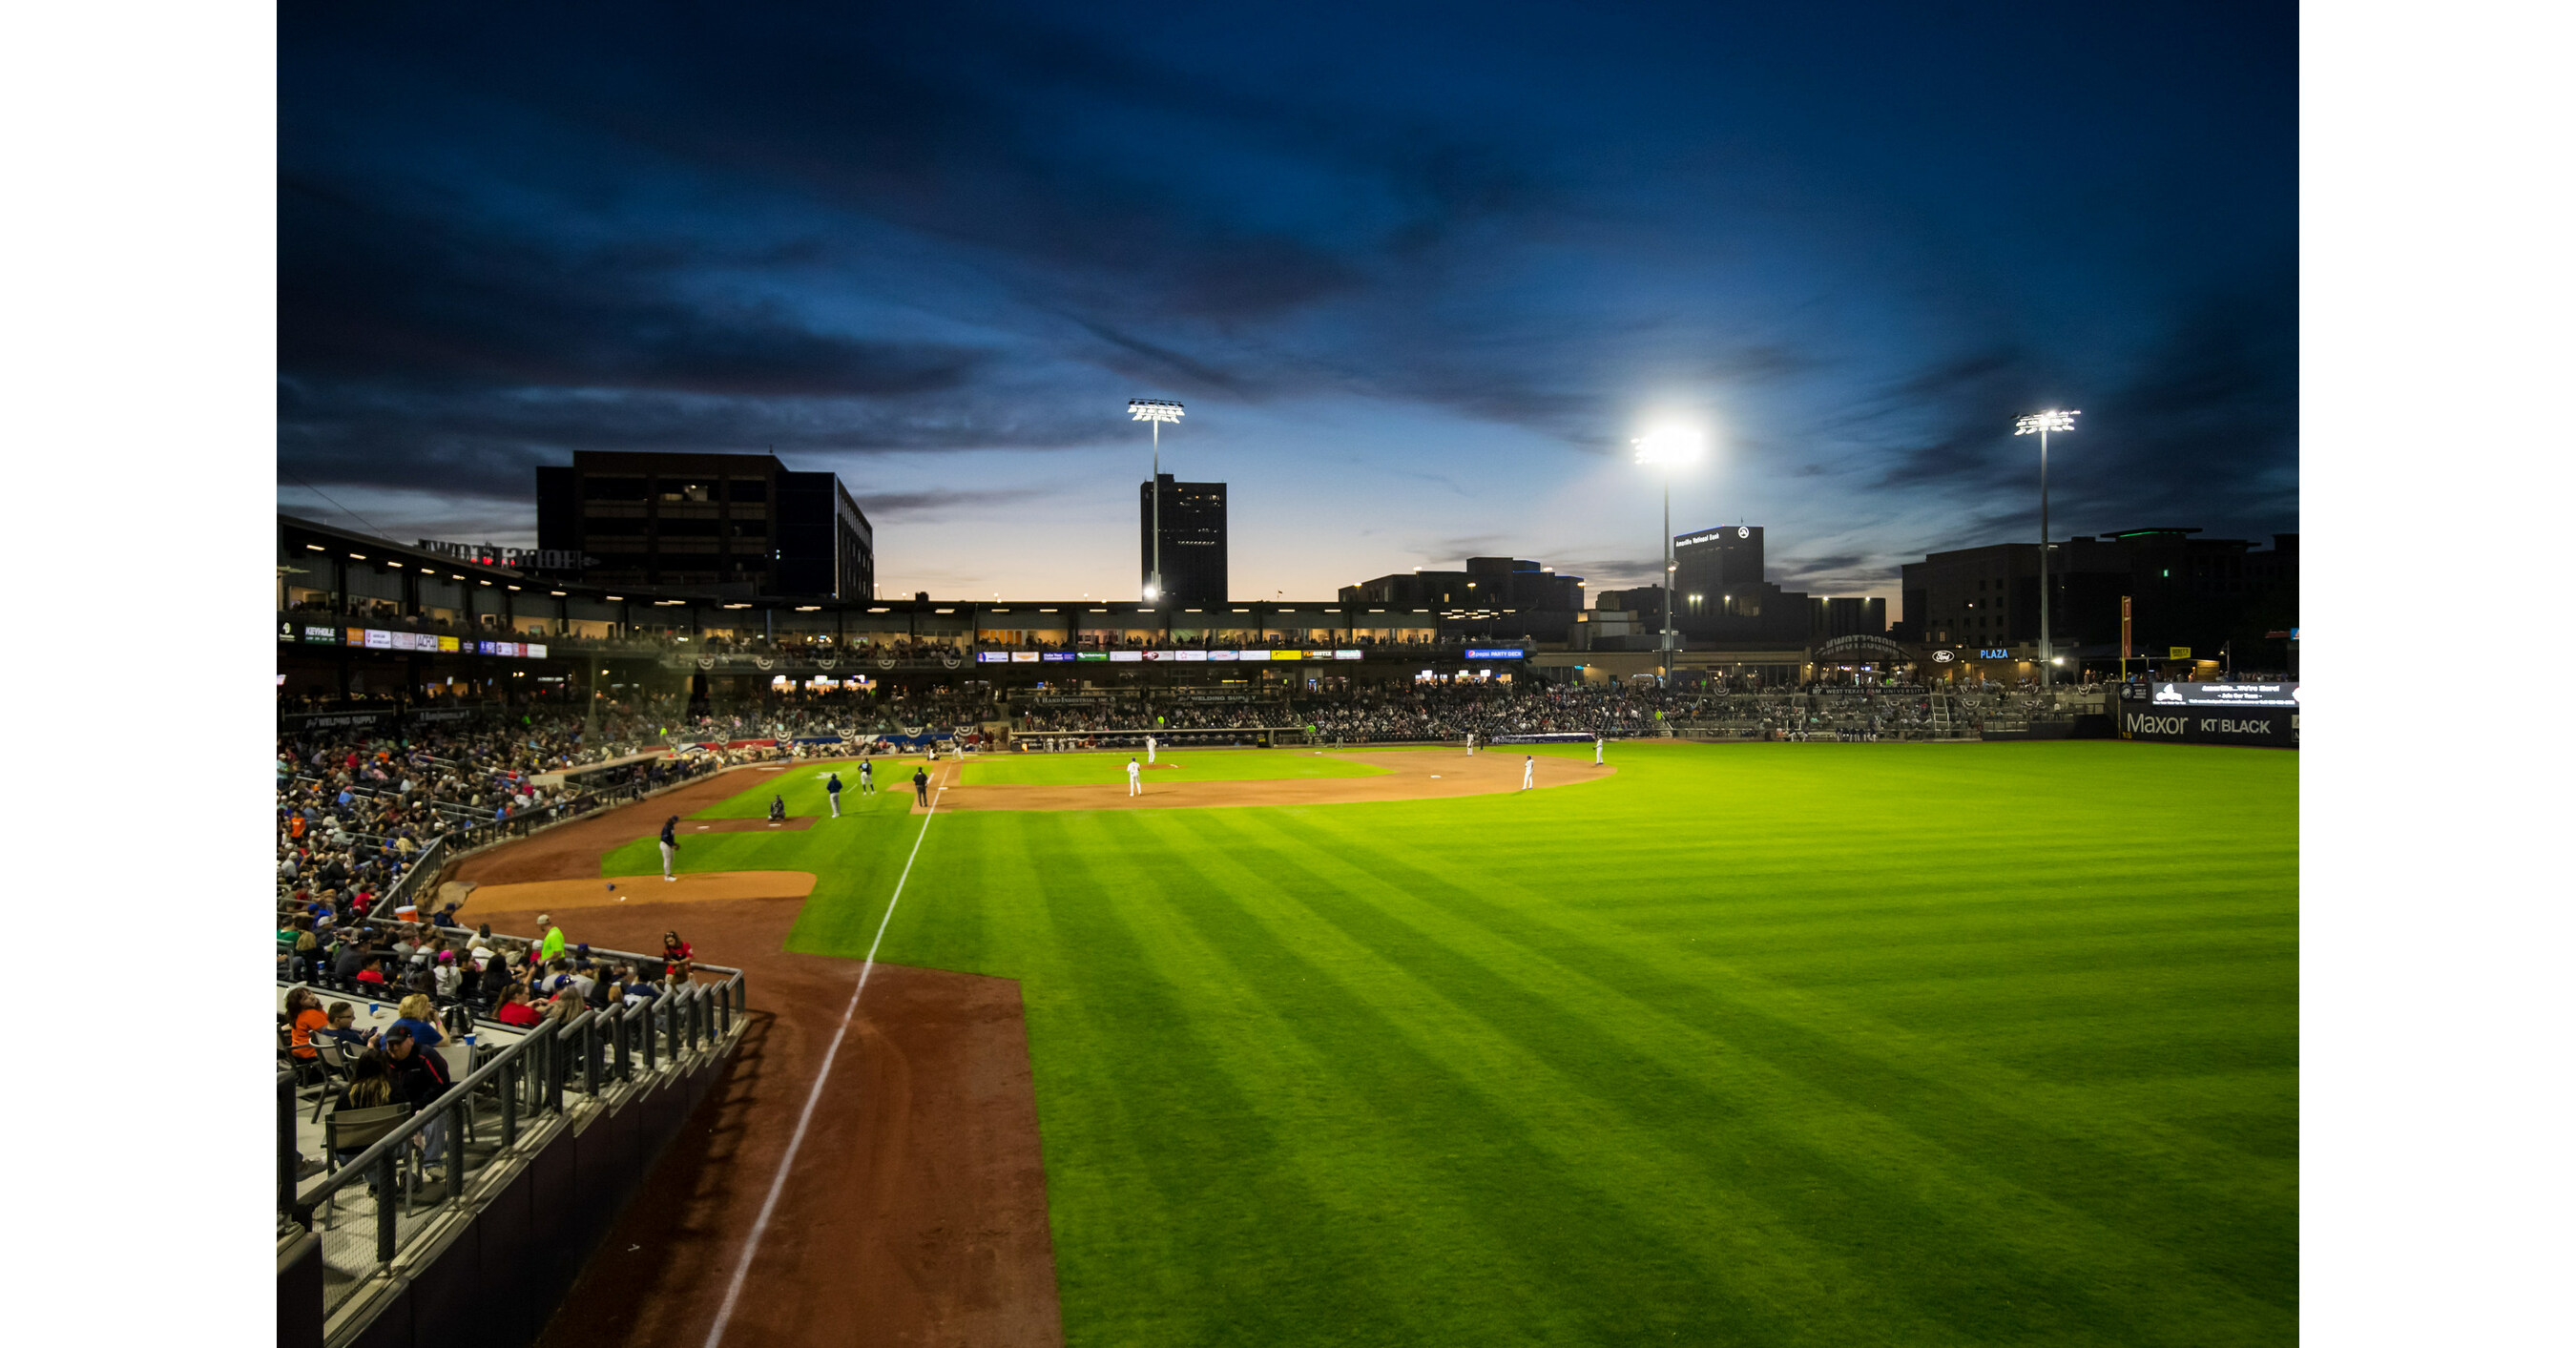 Private equity hitting Minor League Baseball?